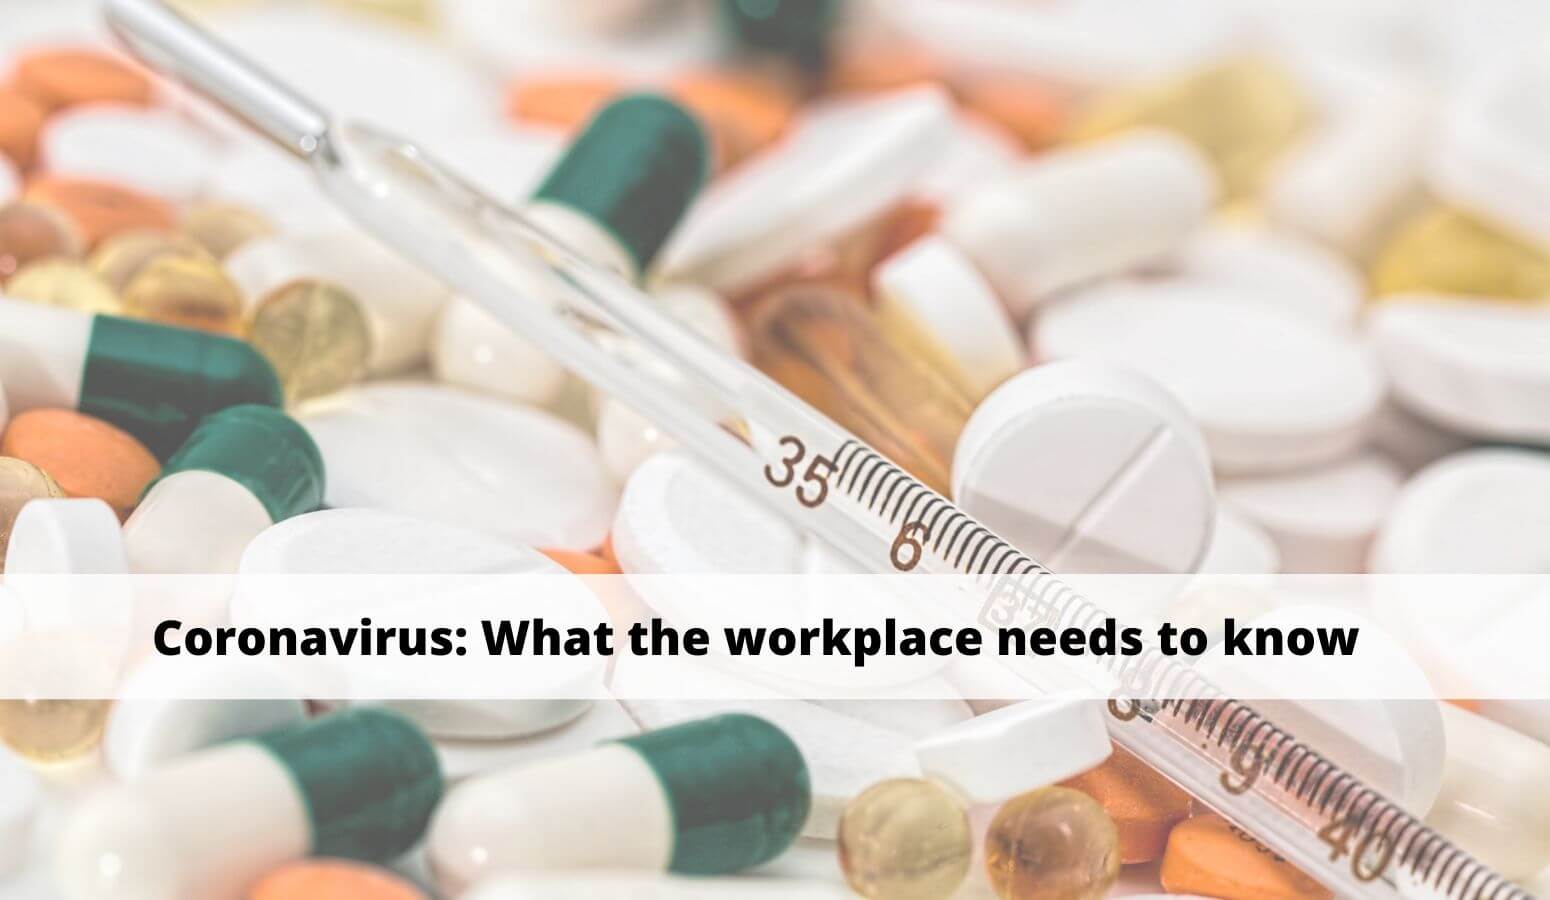 Featured image for “Coronavirus Outbreak at Work: What The Workplace Needs to Know”